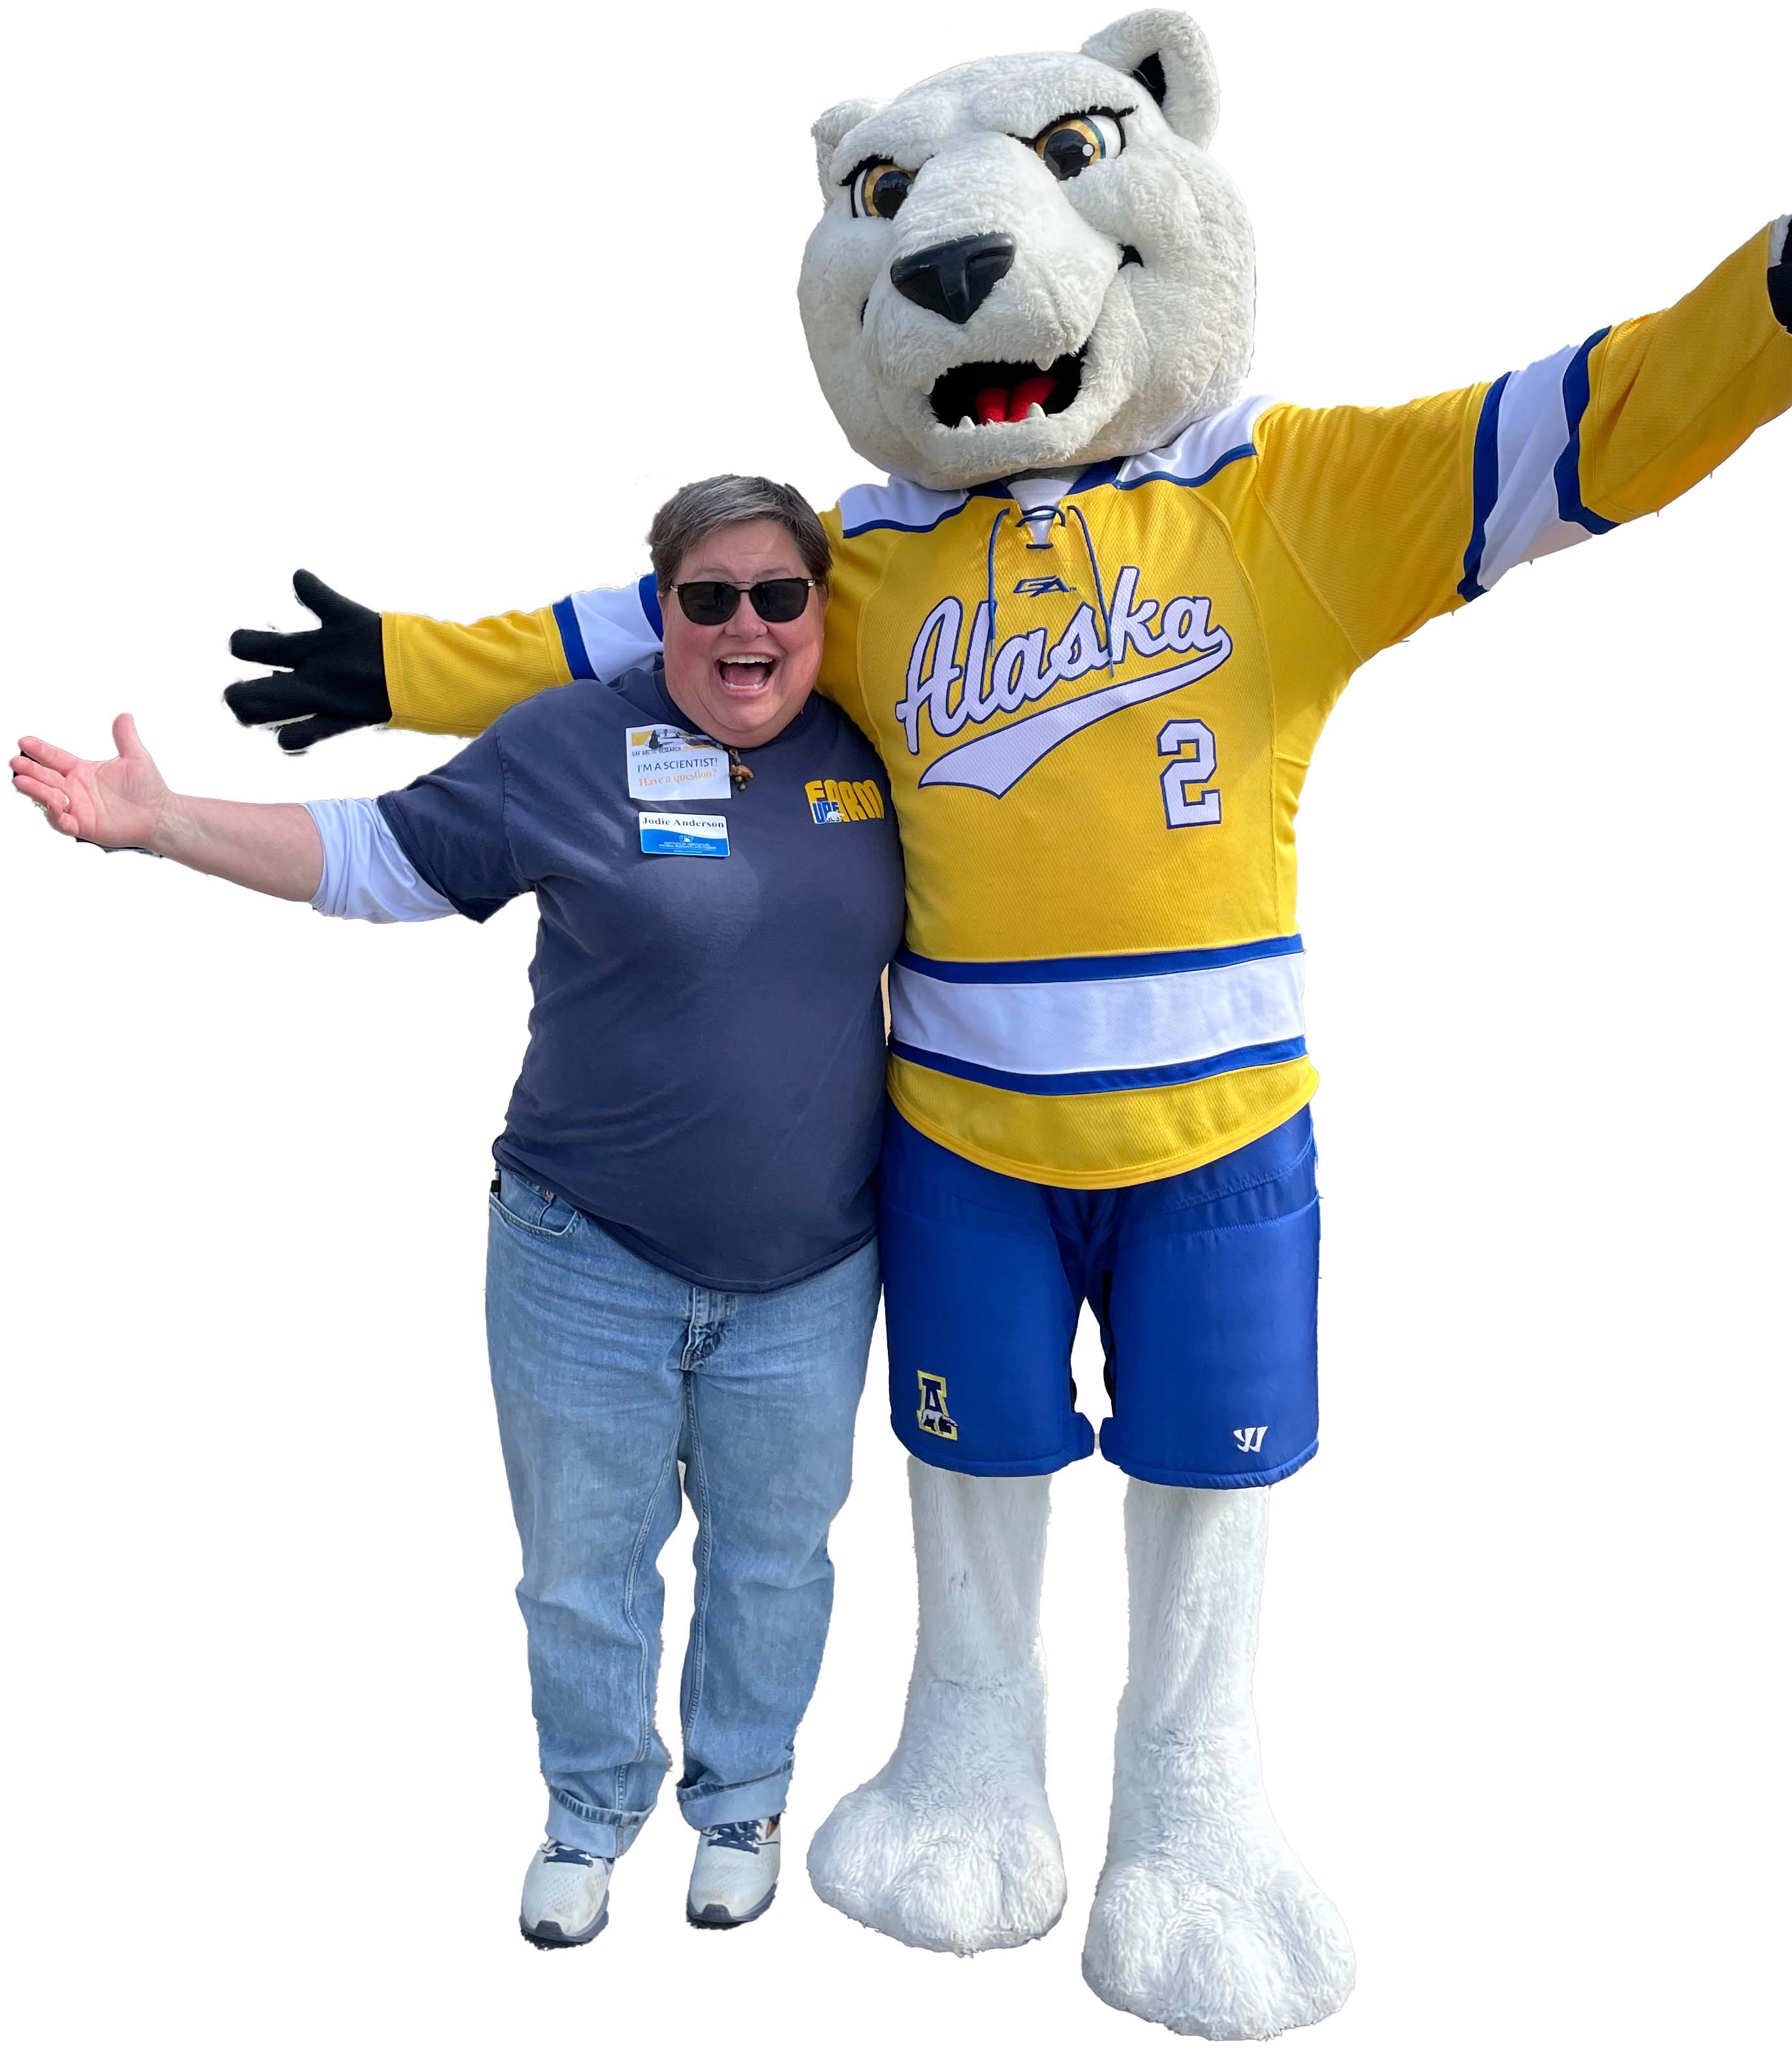 The director, Jodie Anderson, wearing a blue shirt UAF Farm shirt, jeans and sunglasses posing with Nook UAF's nanook mascot repping blue and gold. Both look real happy!